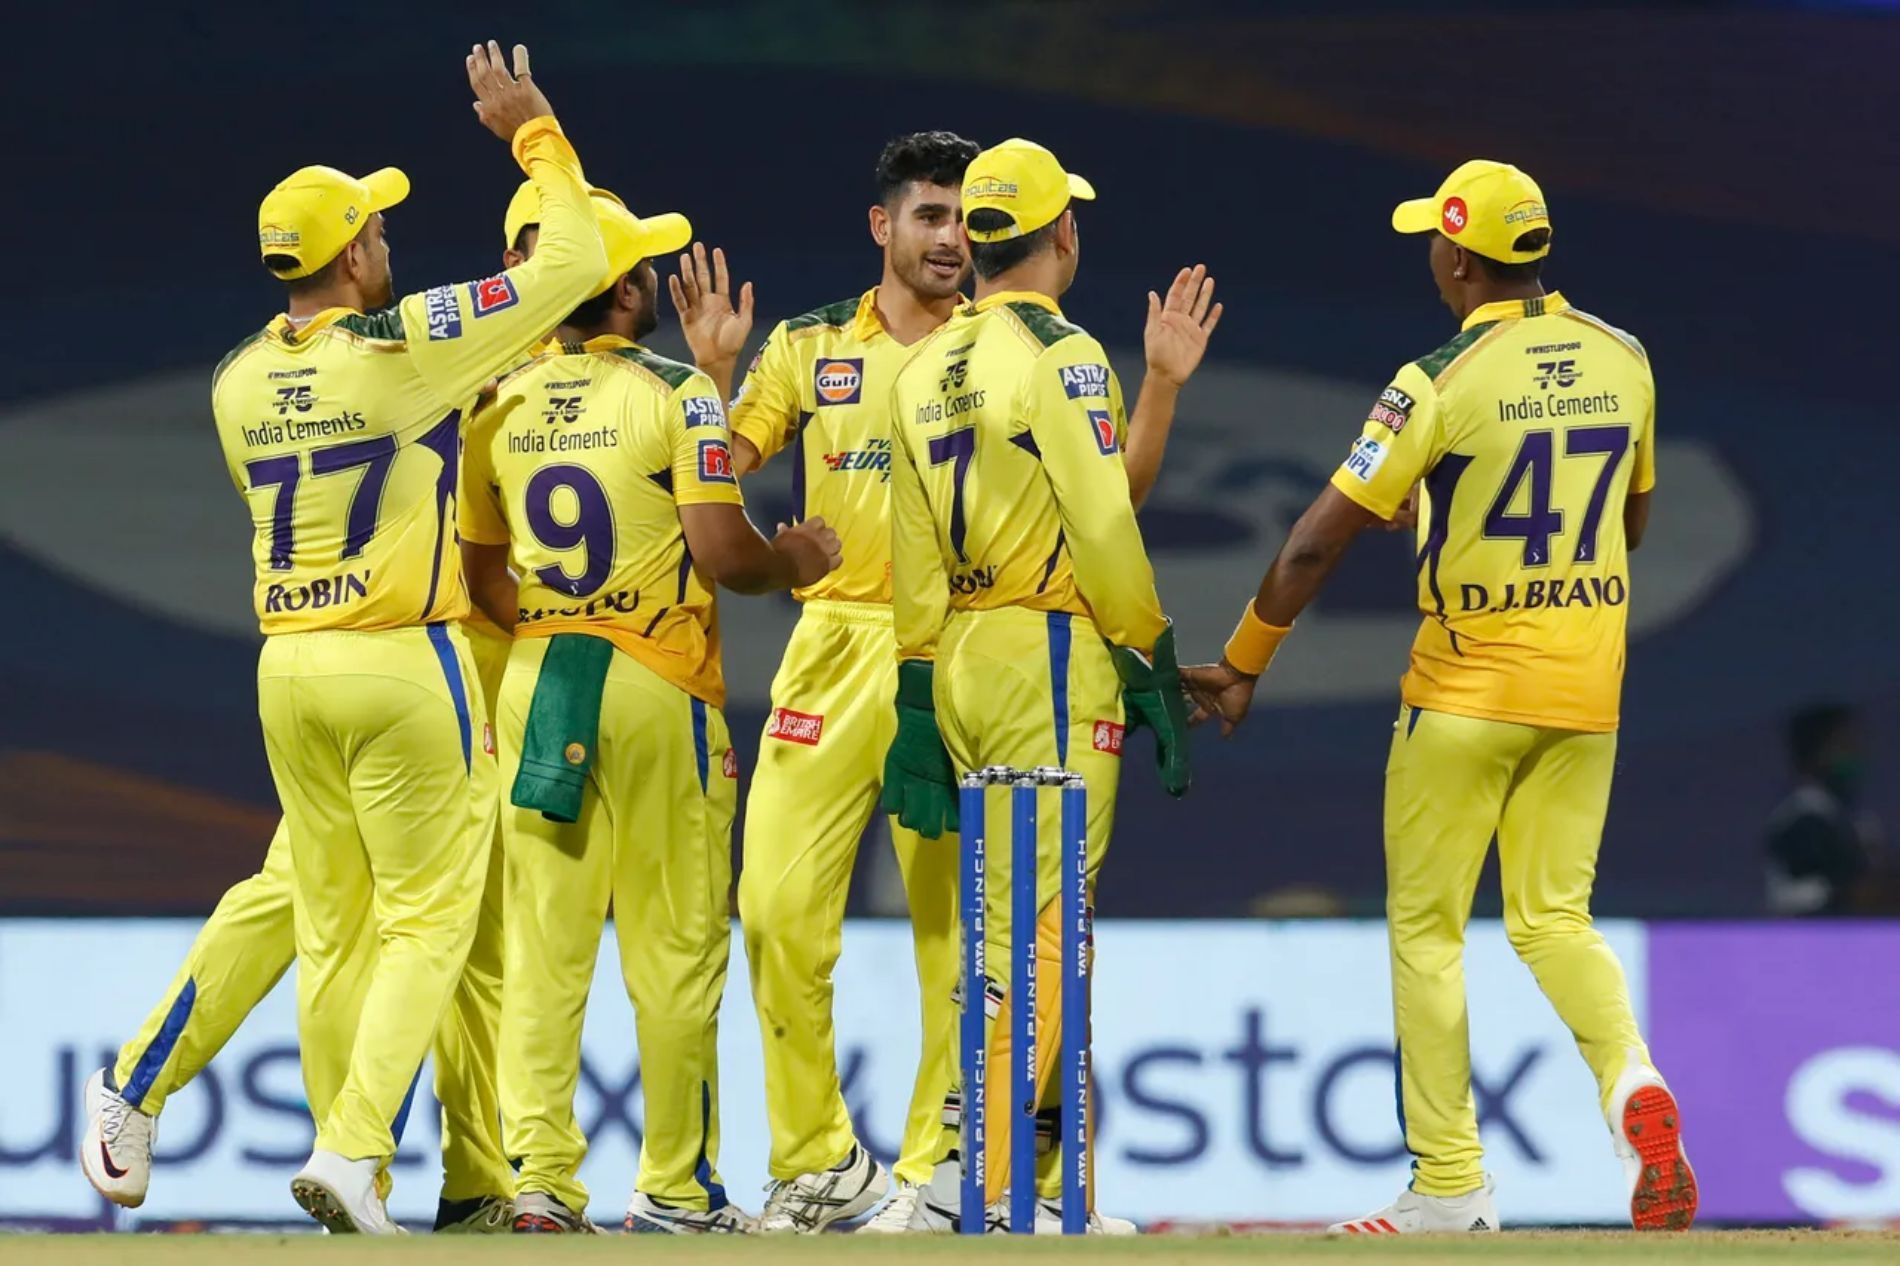 Chennai Super Kings players celebrate a wicket. Pic: IPLT20.COM